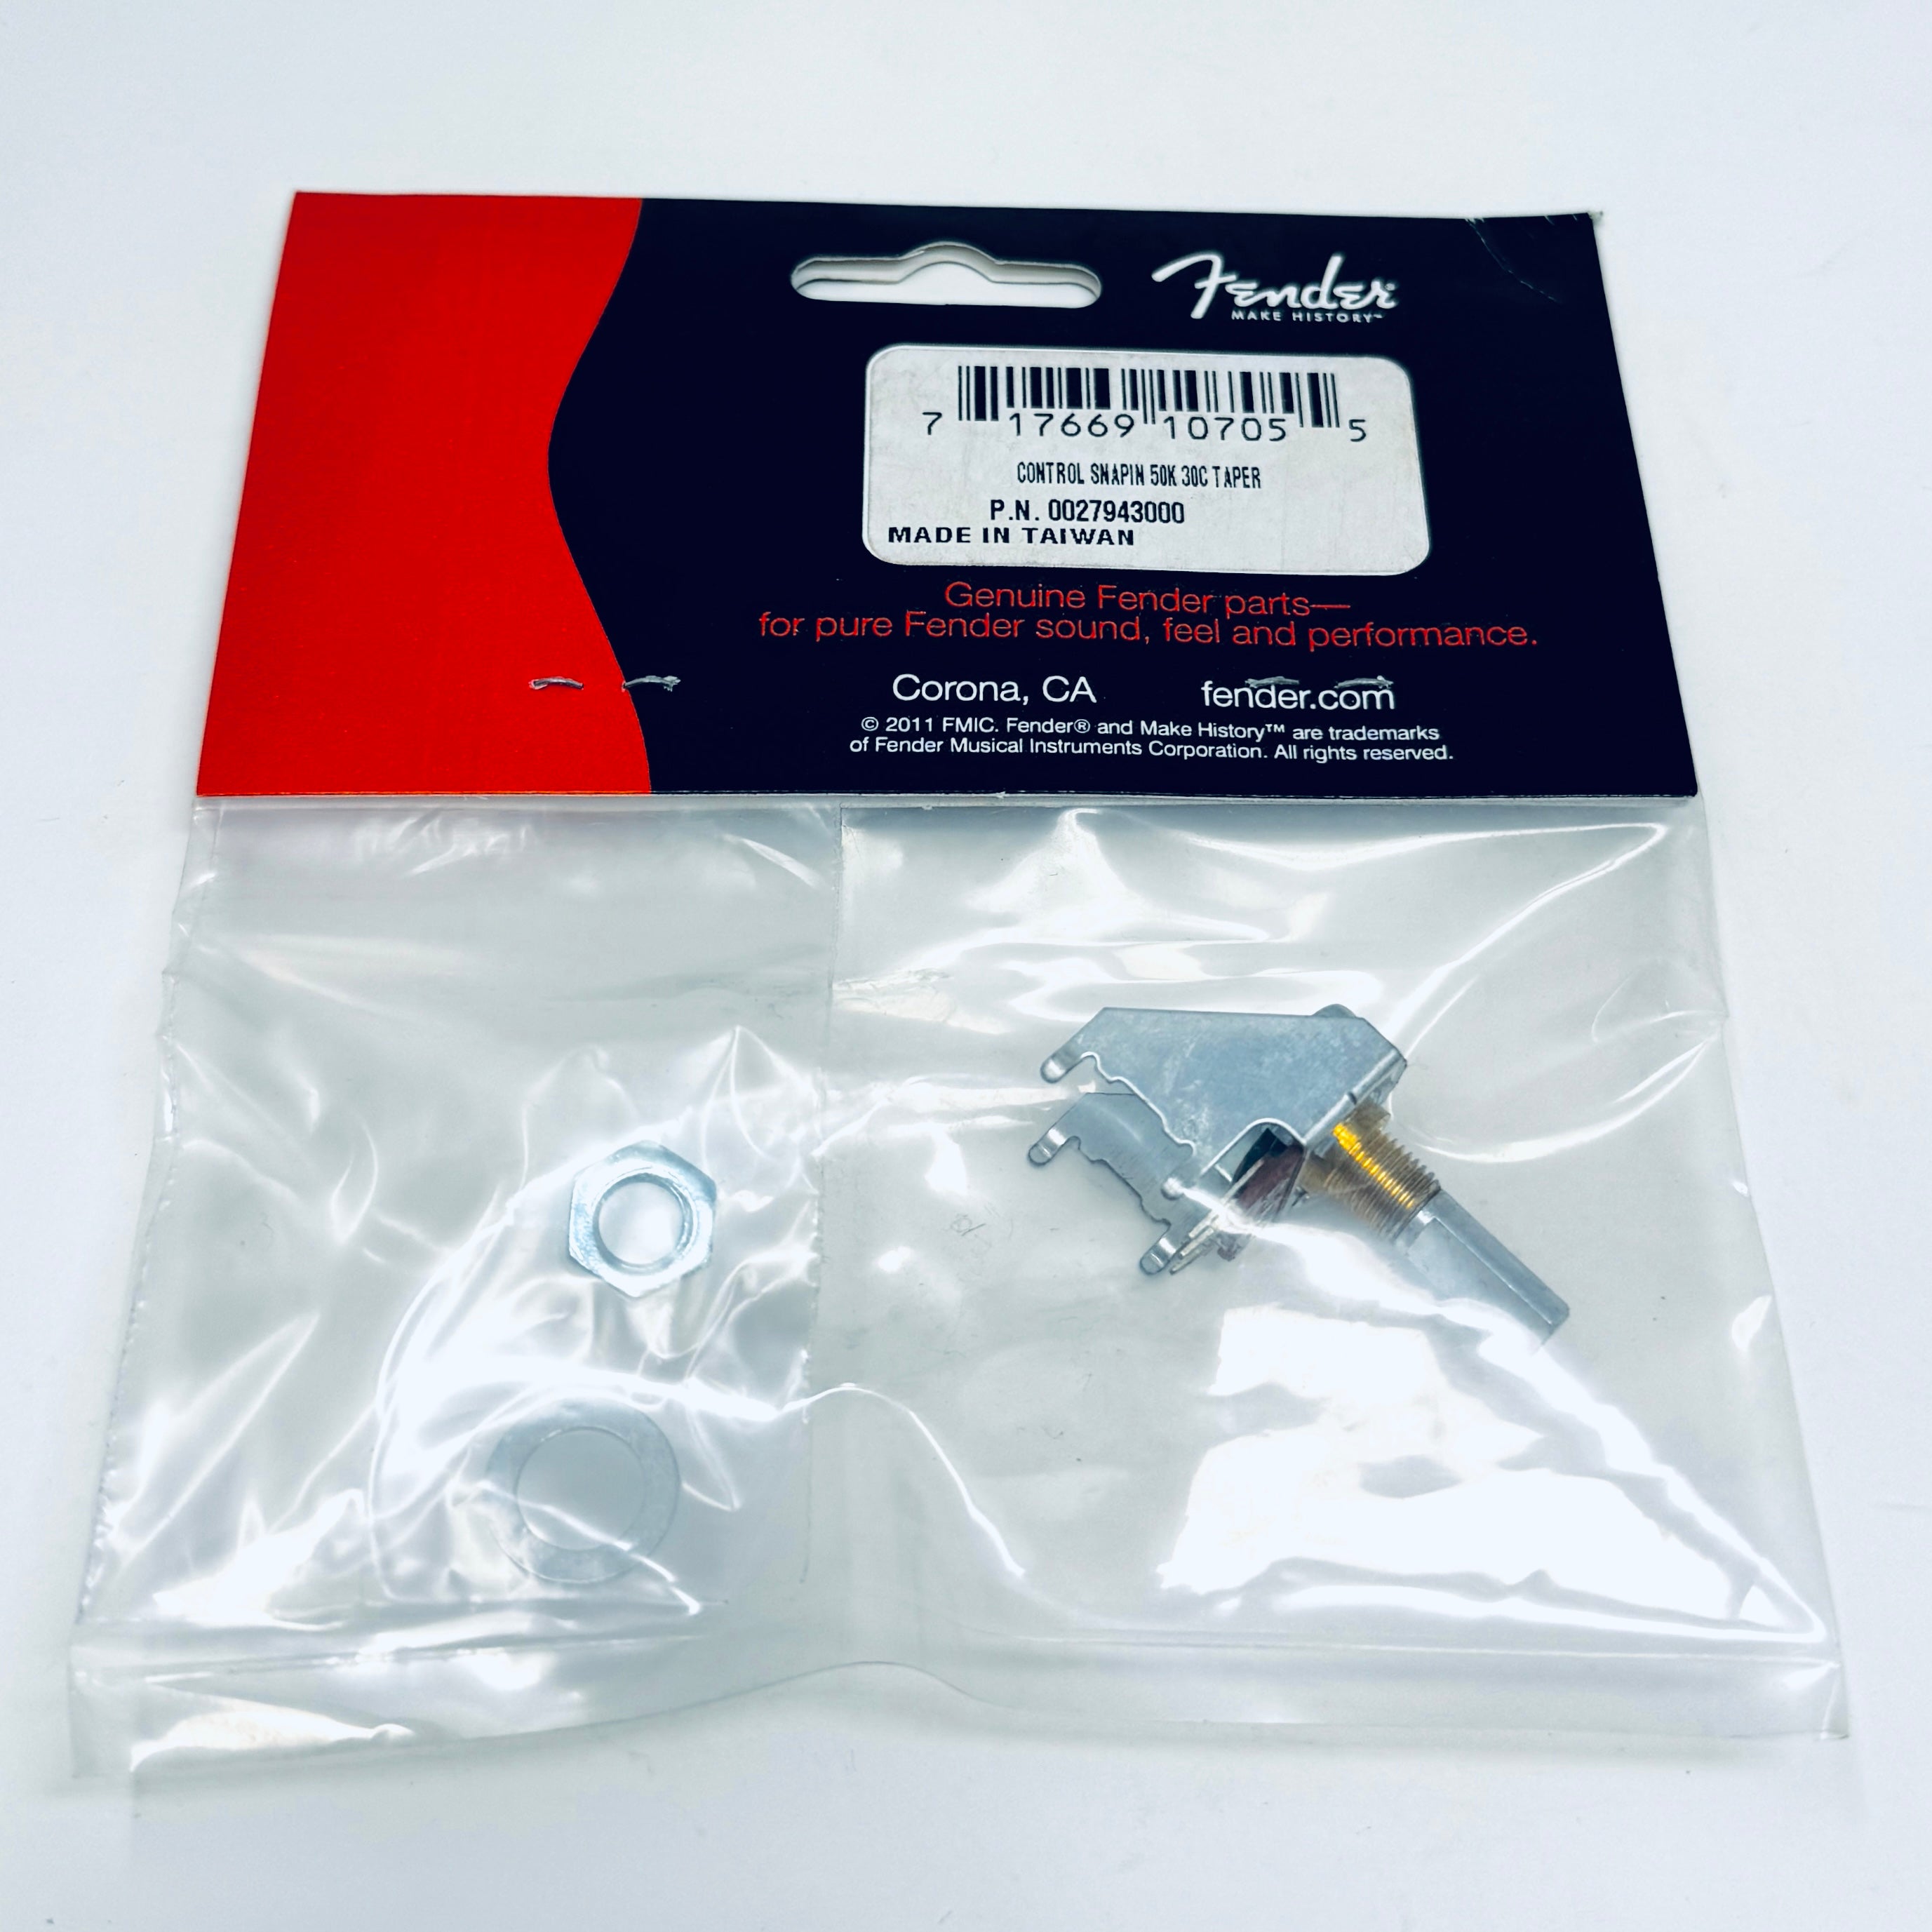 Authentic Fender Control Snapin 50k 30c Taper Potentiometer, authentic fender replacment parts, ruby parts